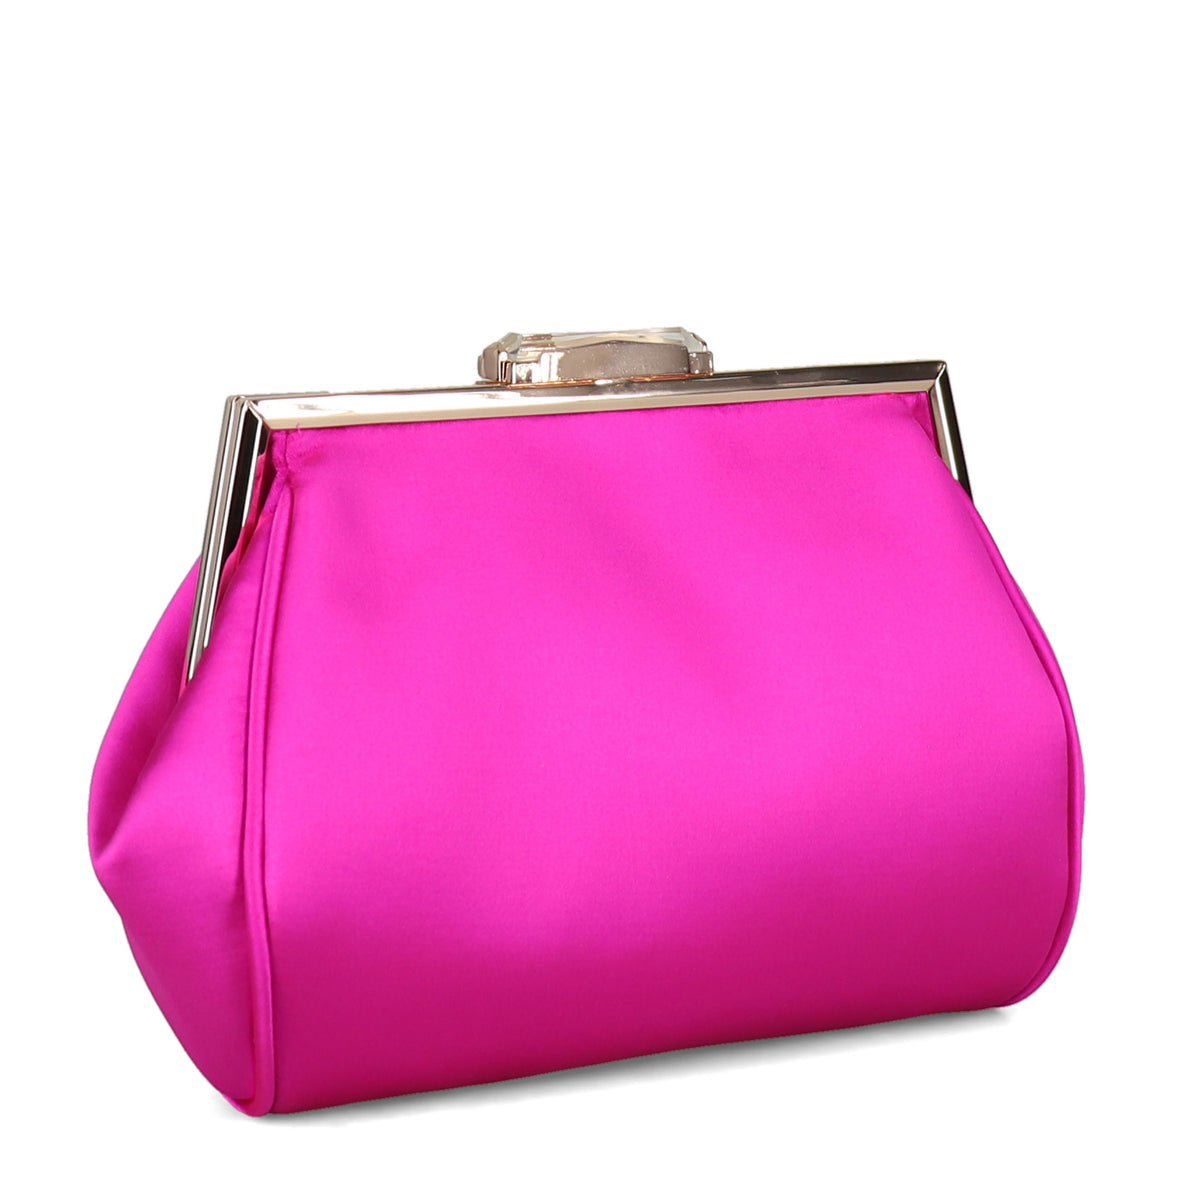 Jewel Structured Pouch With Beveled Frame Closure